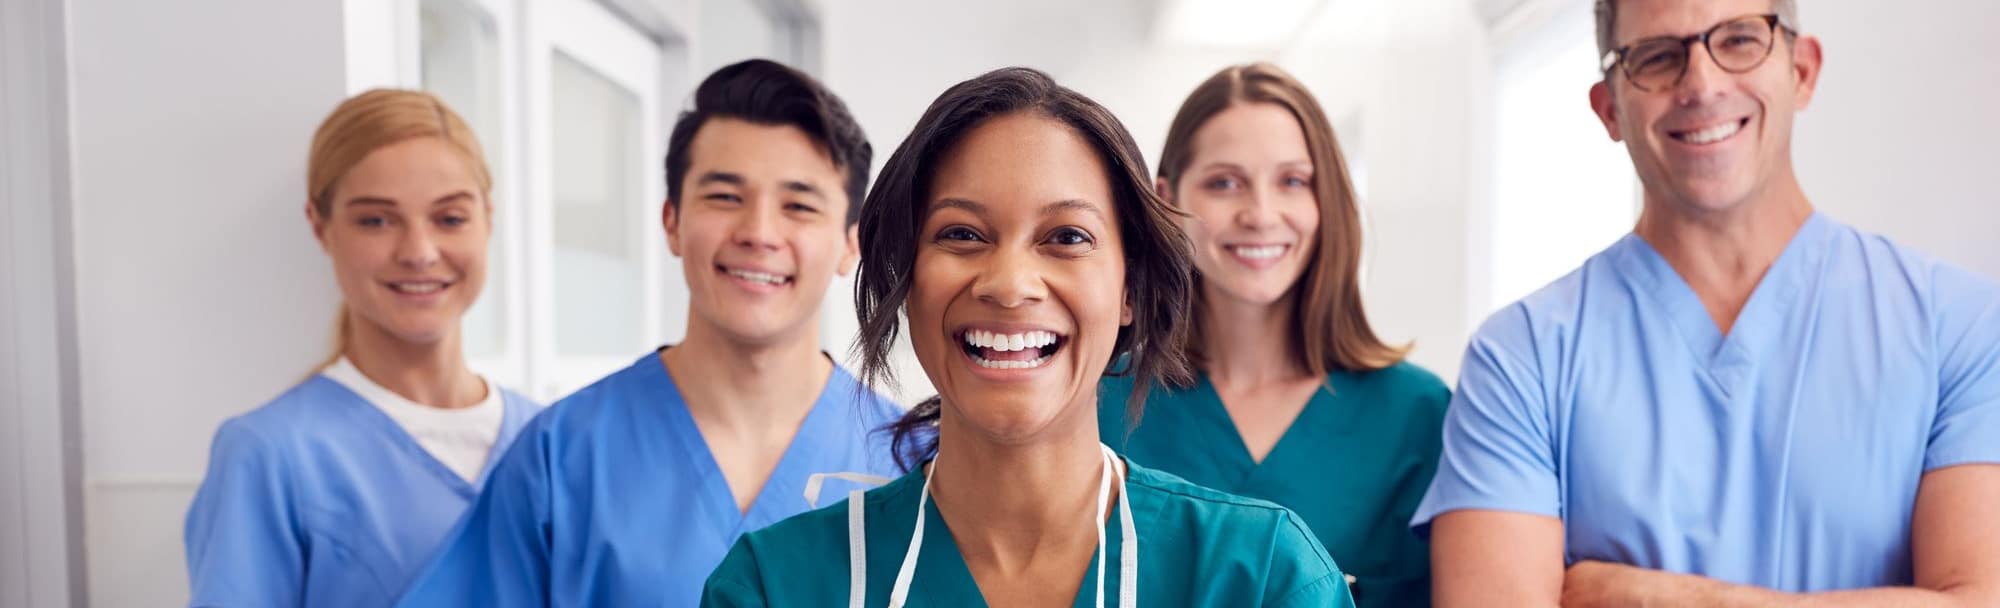 smiling woman with clipboard standing with three smiling medical coworkers in background